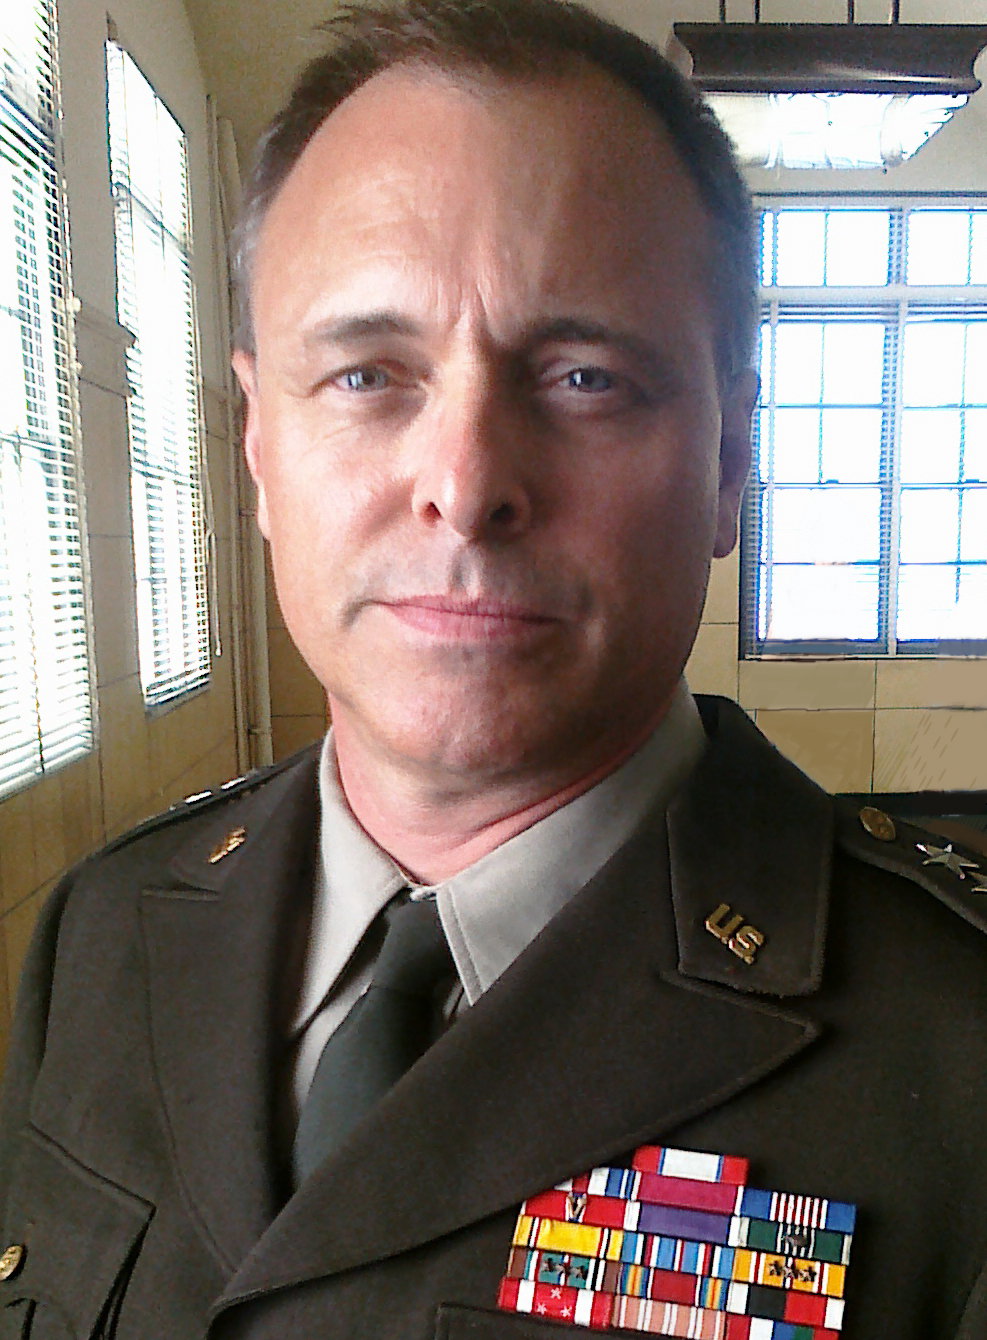 Barry Levy as General McLaine in 'Under God' 2010